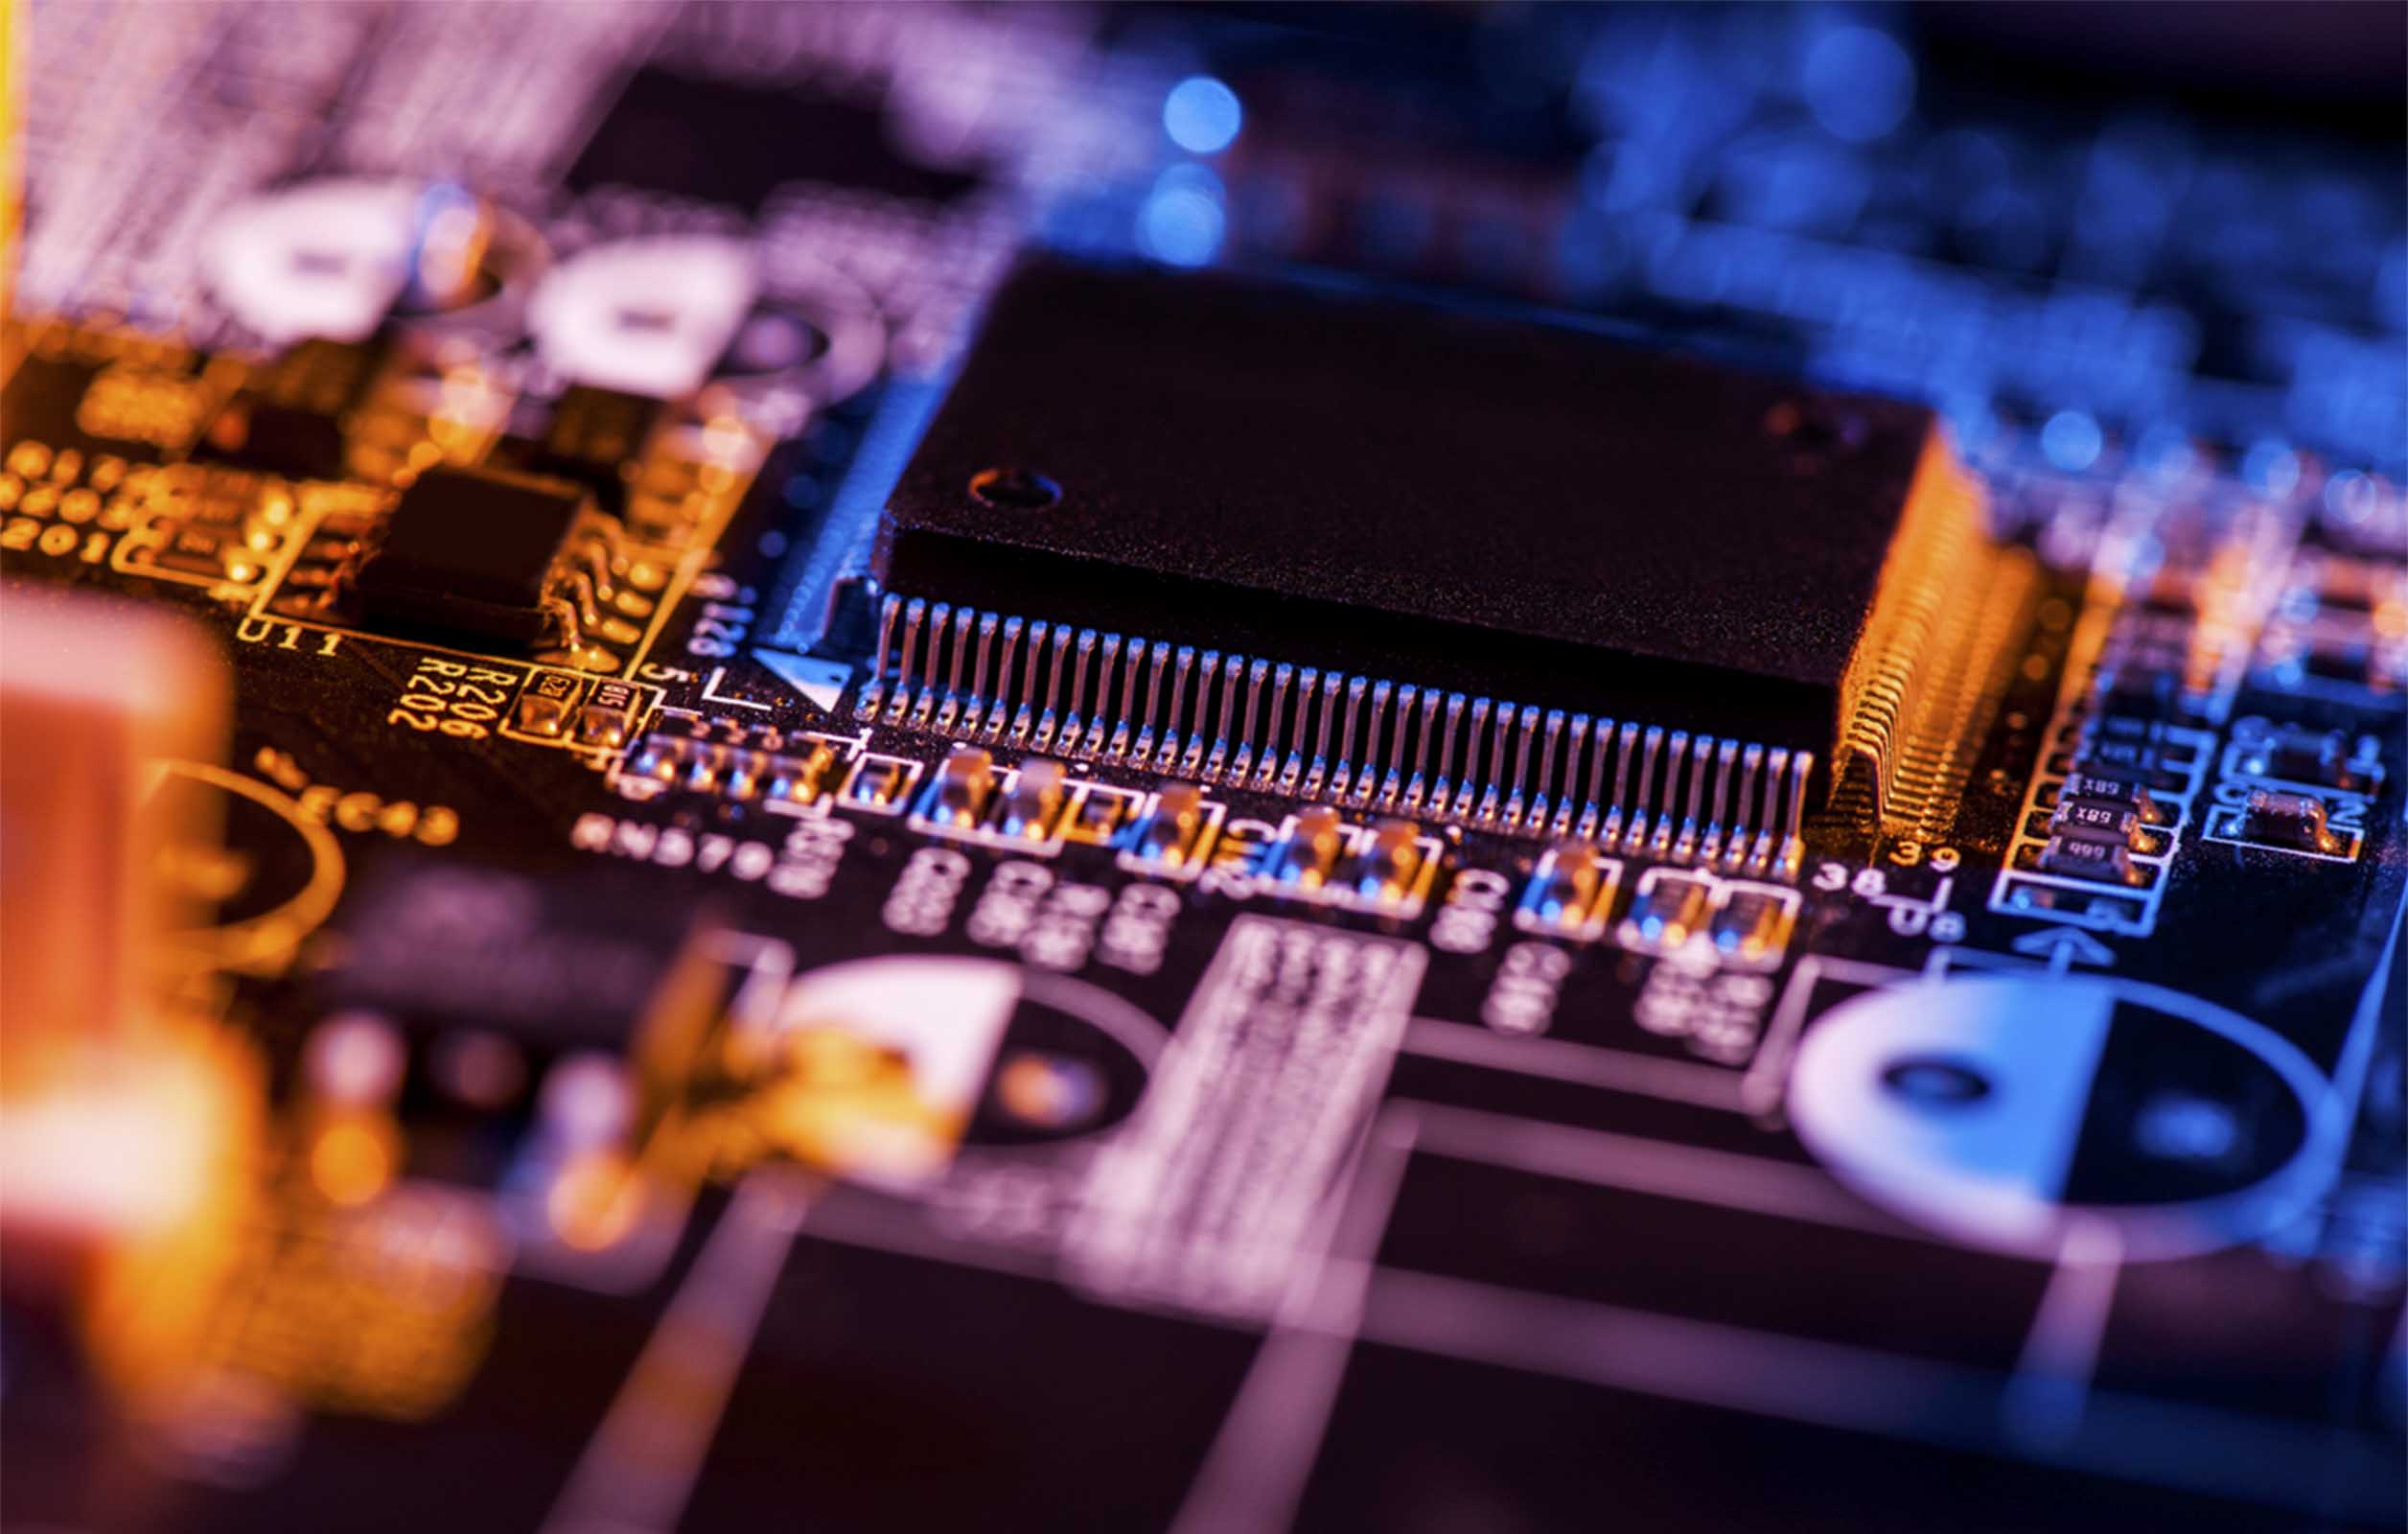 A close up shot of a circuit board with a large processing chip